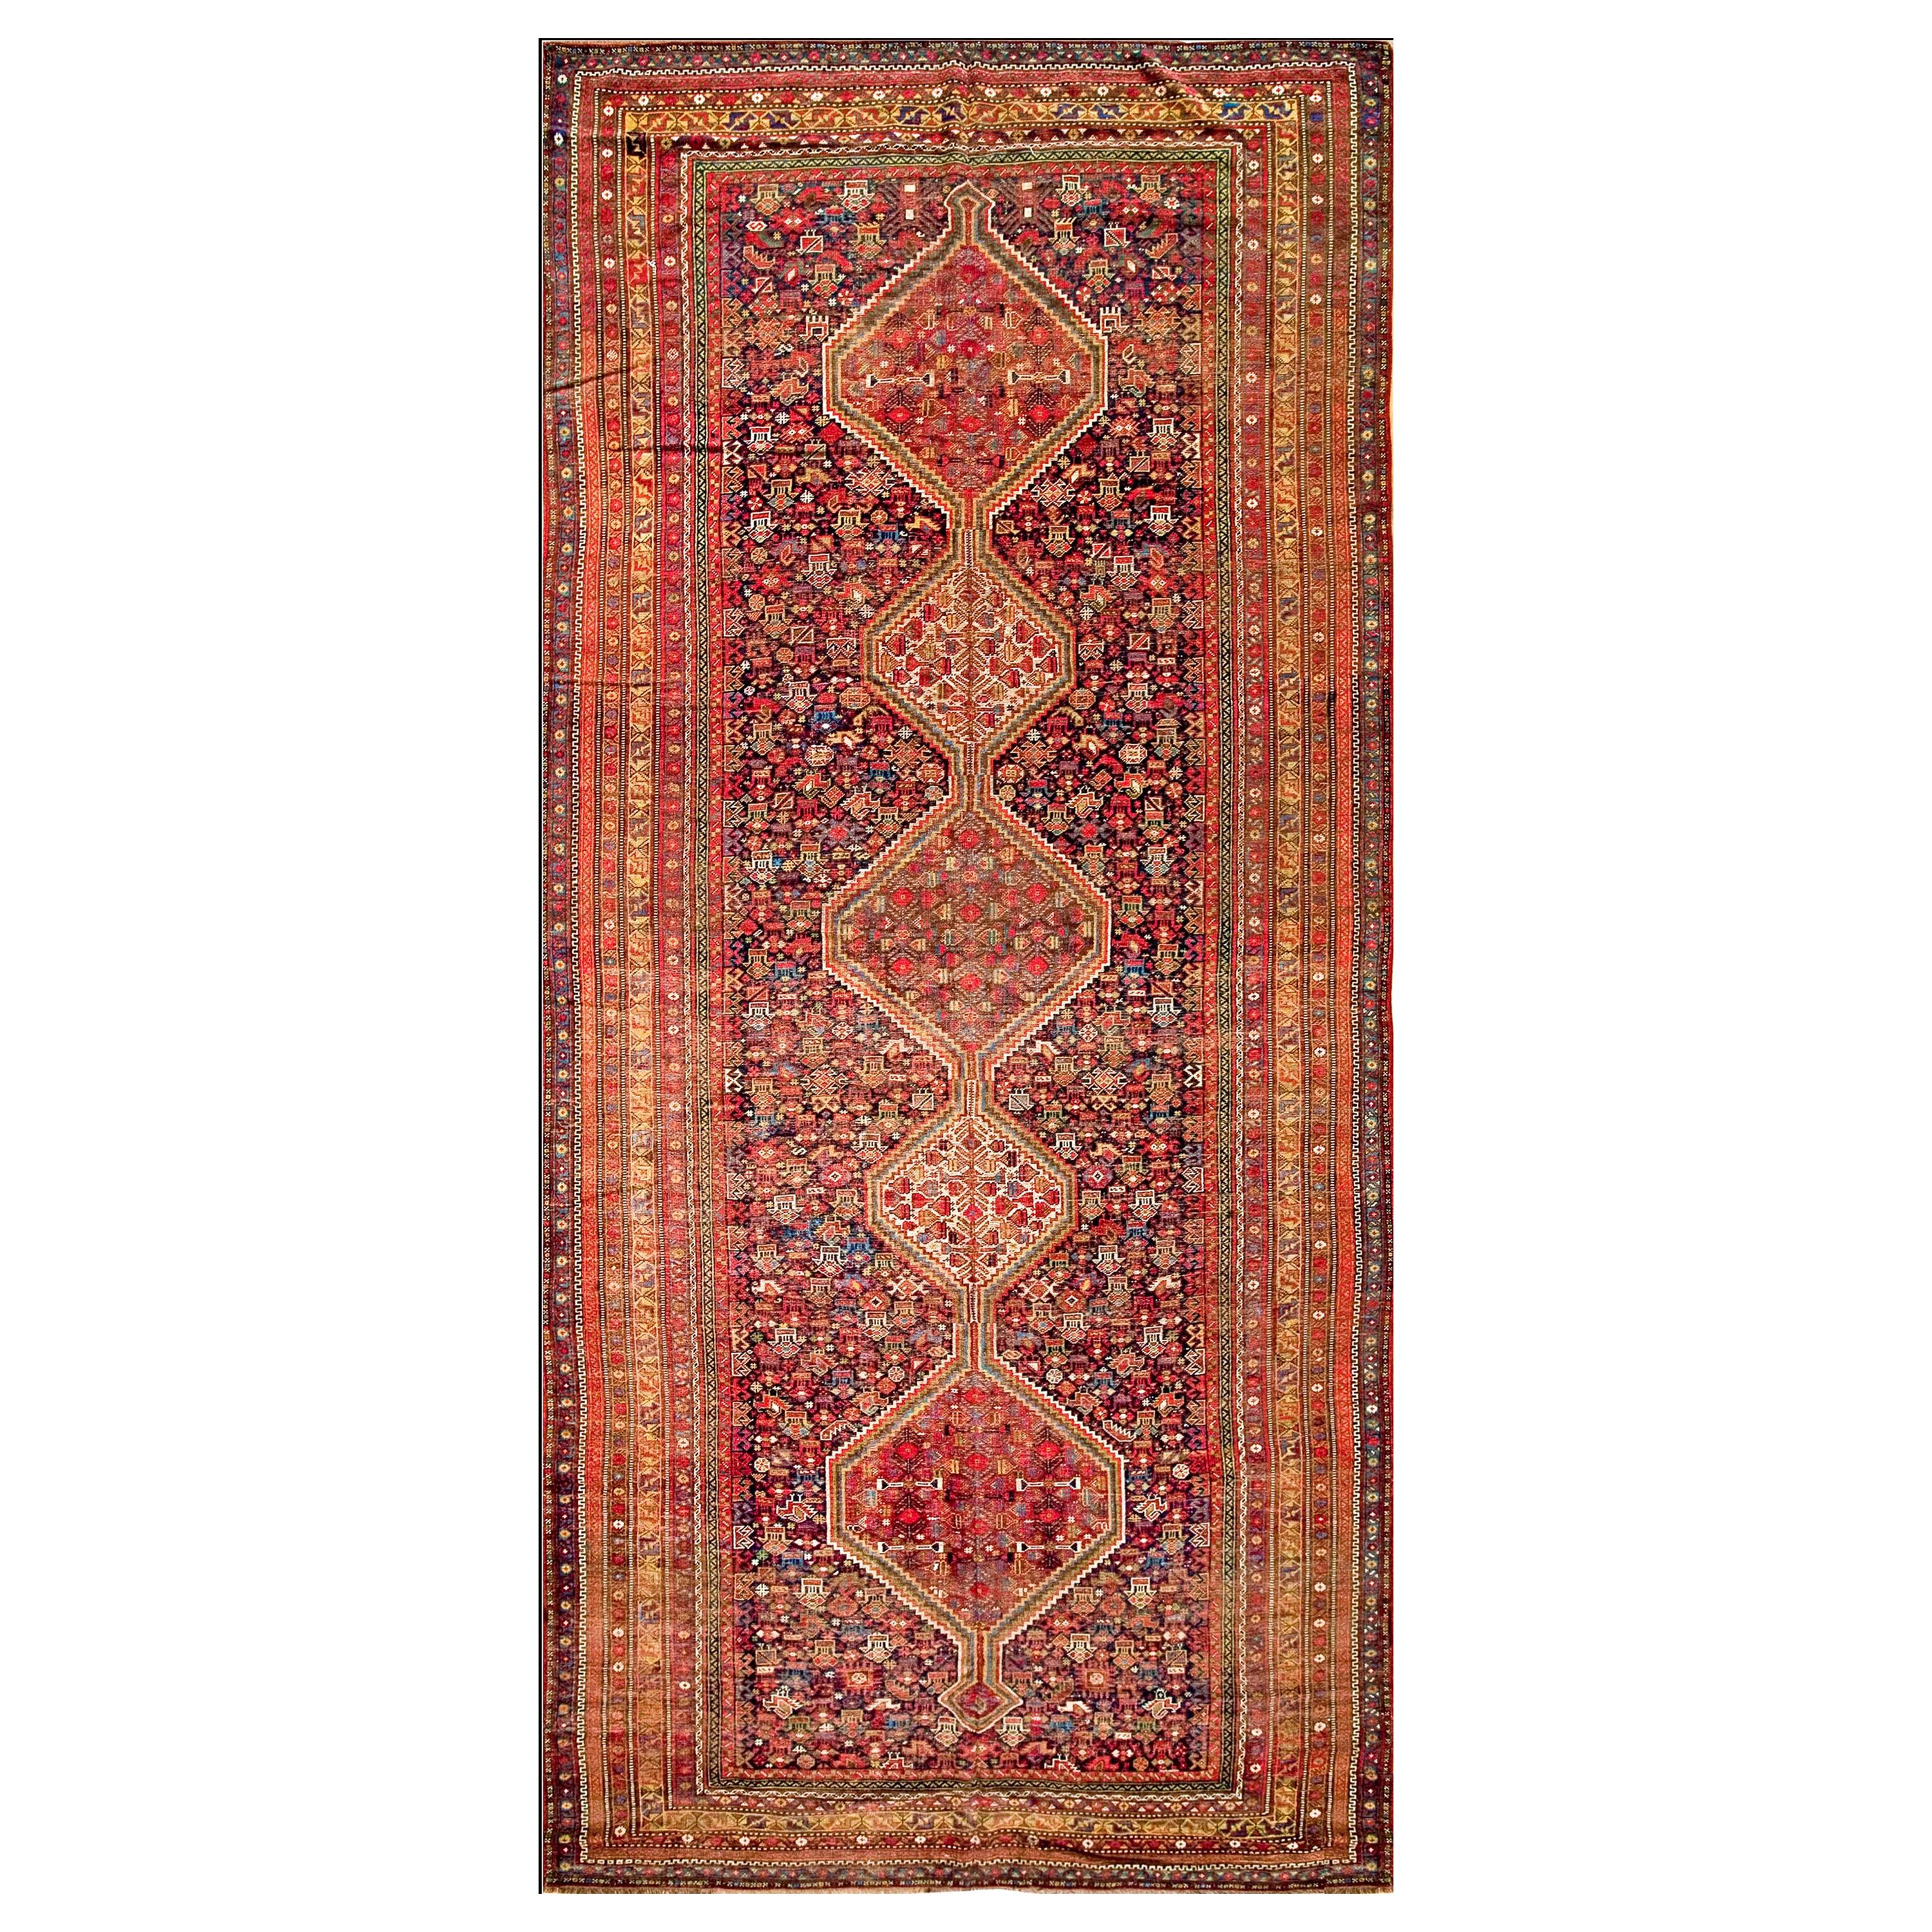 Early 20th Century S Persian Ghashgaie Gallery Carpet (6'6" x 14'4" - 198 x 437) For Sale